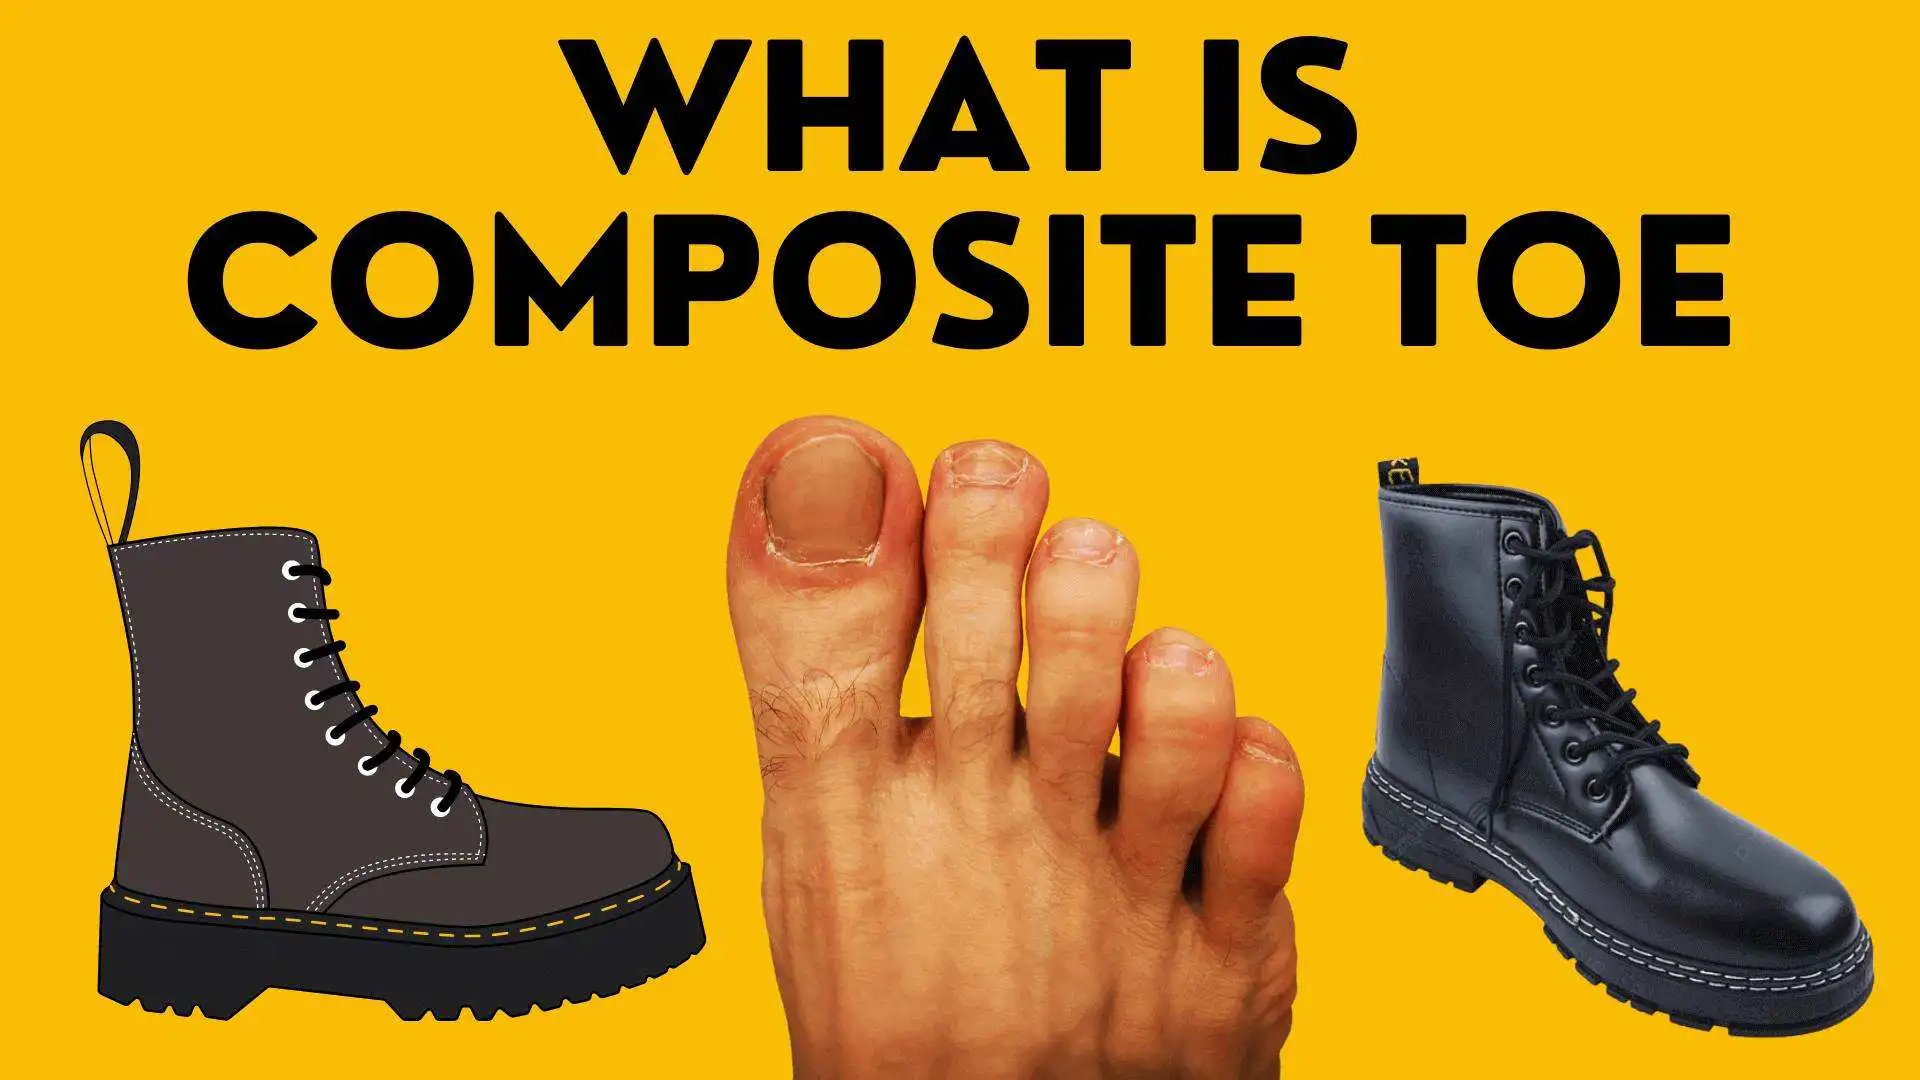 What is composite toe